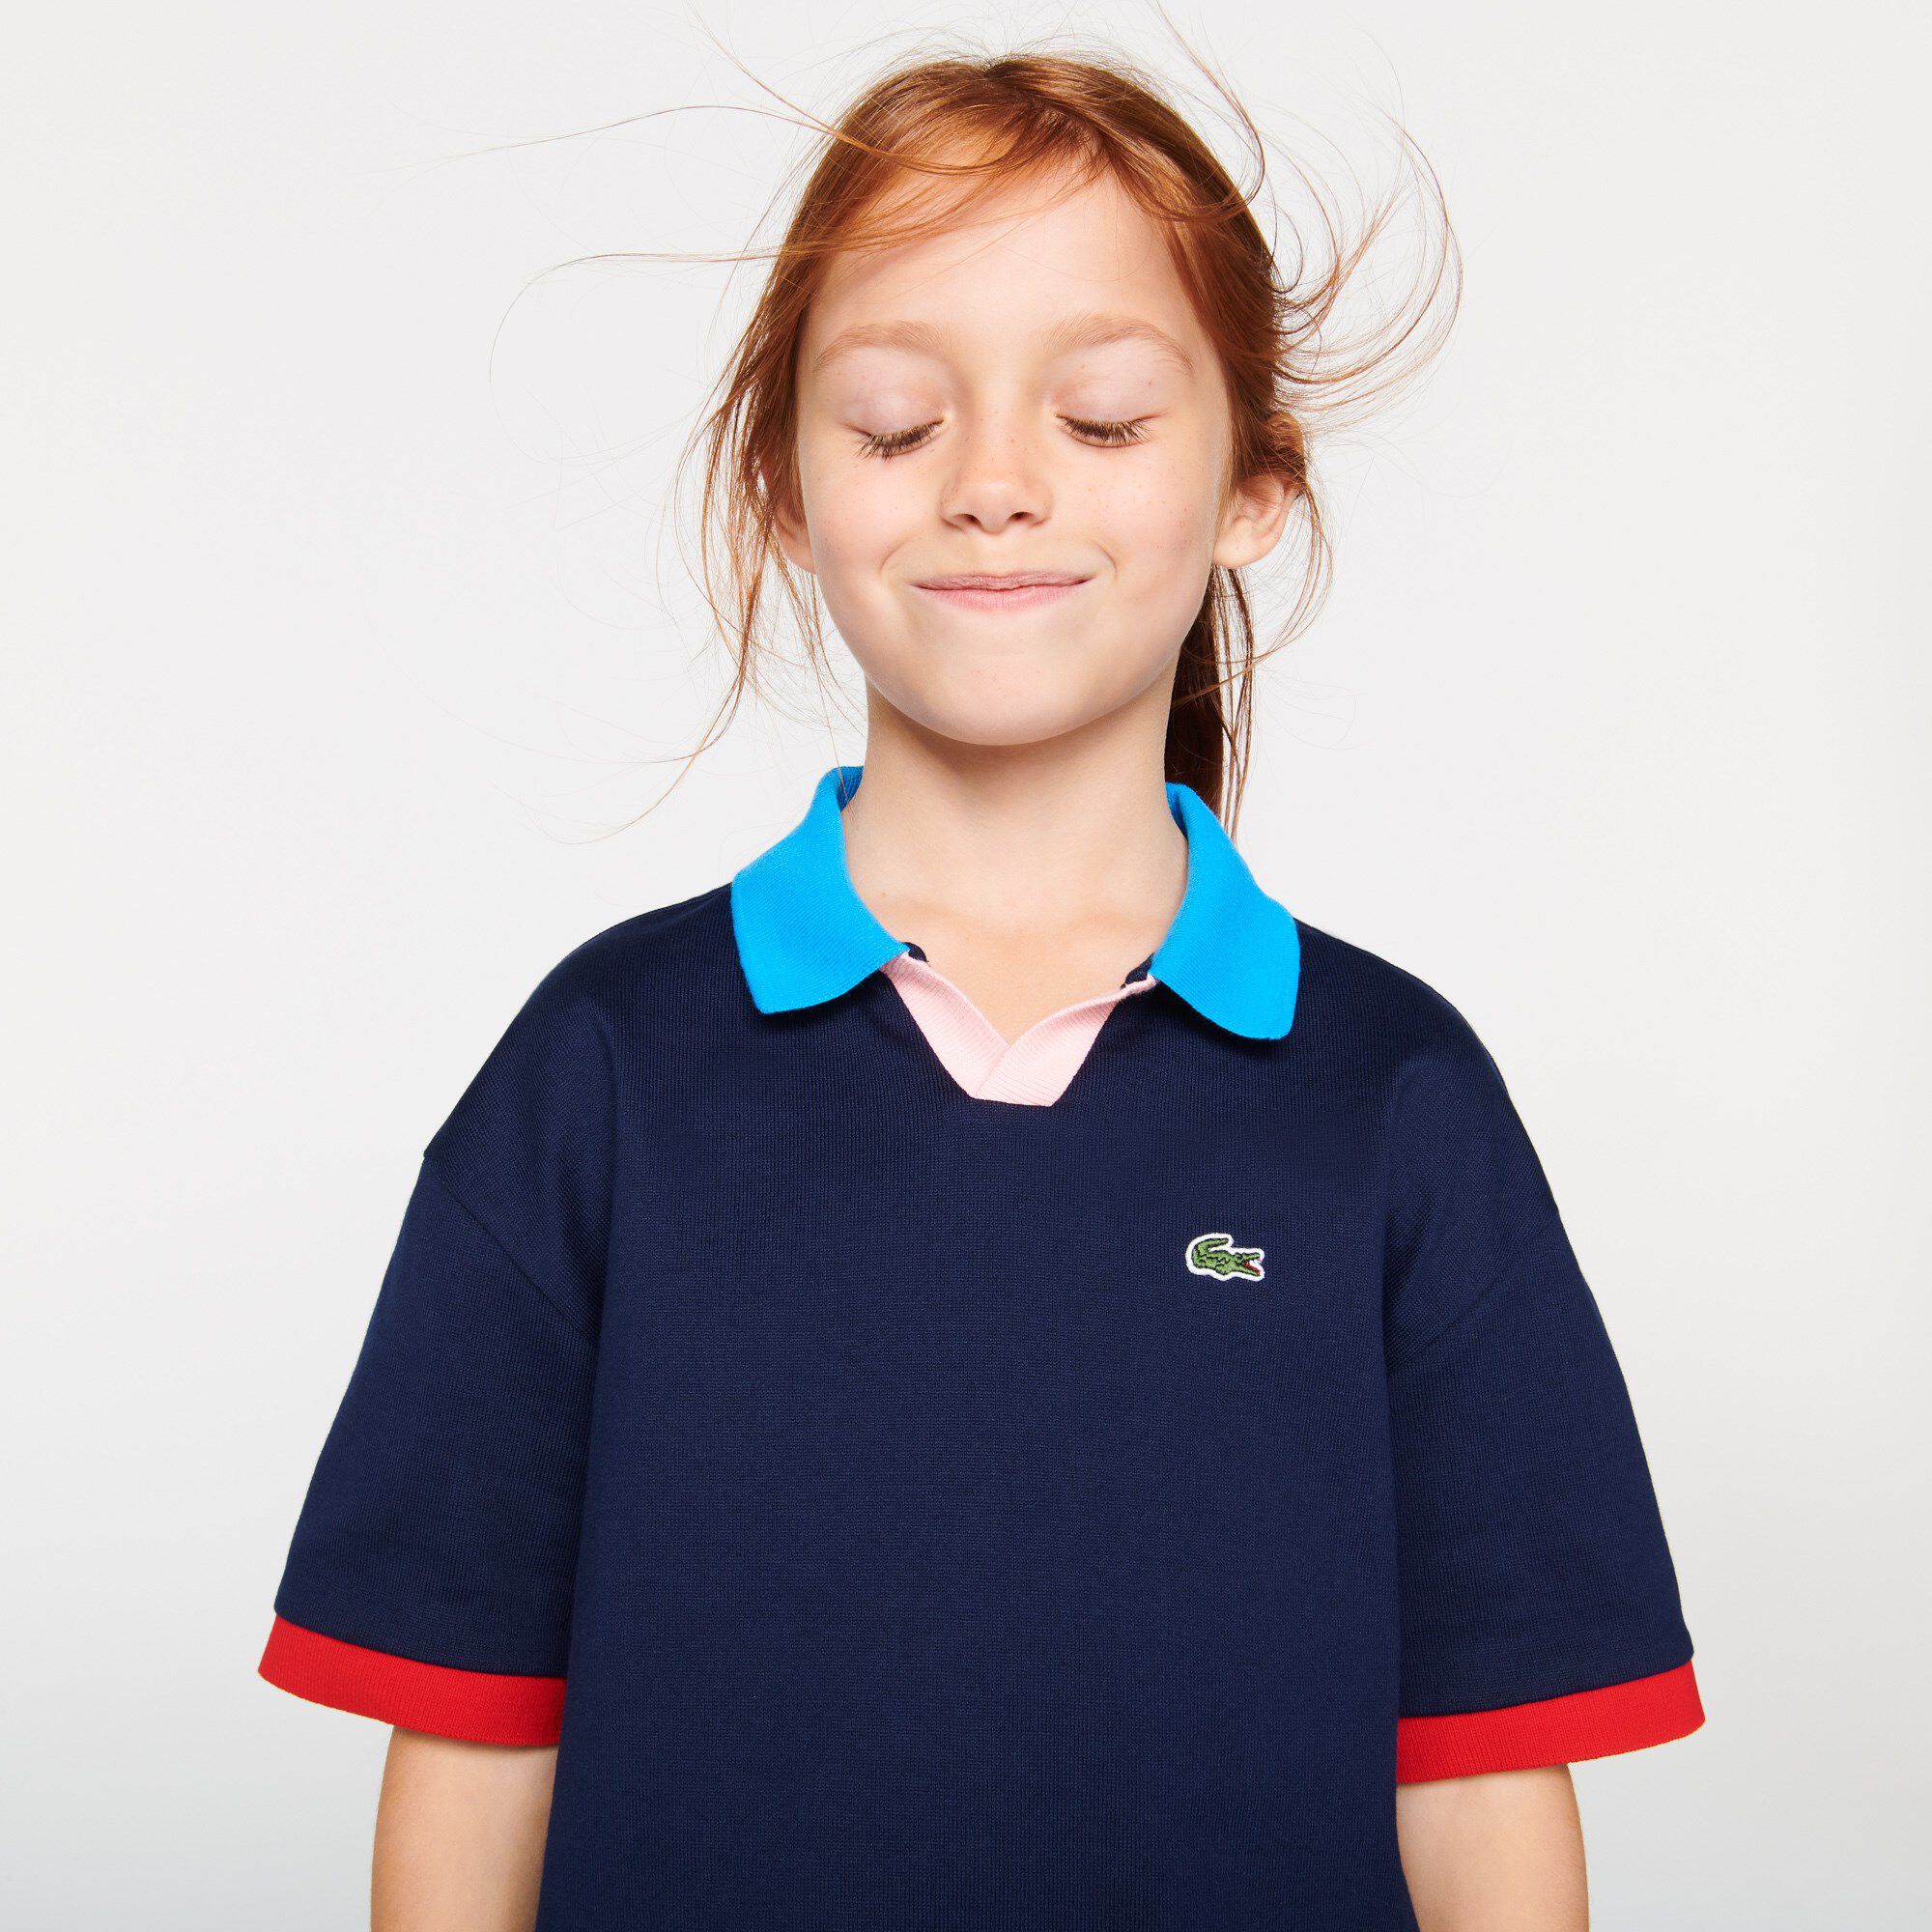 Girls’ Lacoste Colorblock Accents Cotton Polo